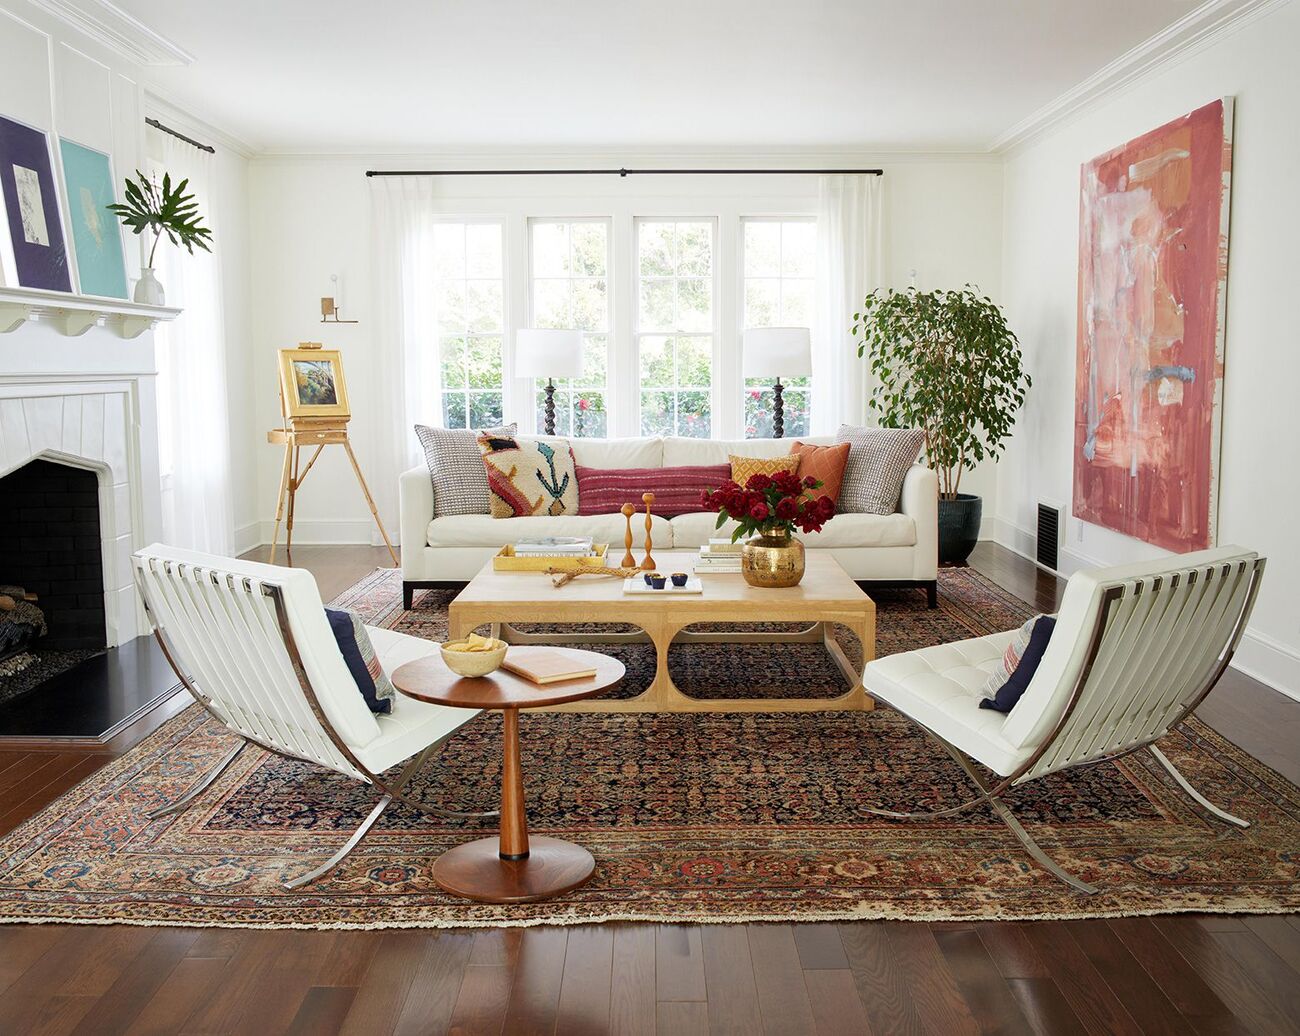 Arranging Living Room Furniture: 10 Rules To Follow